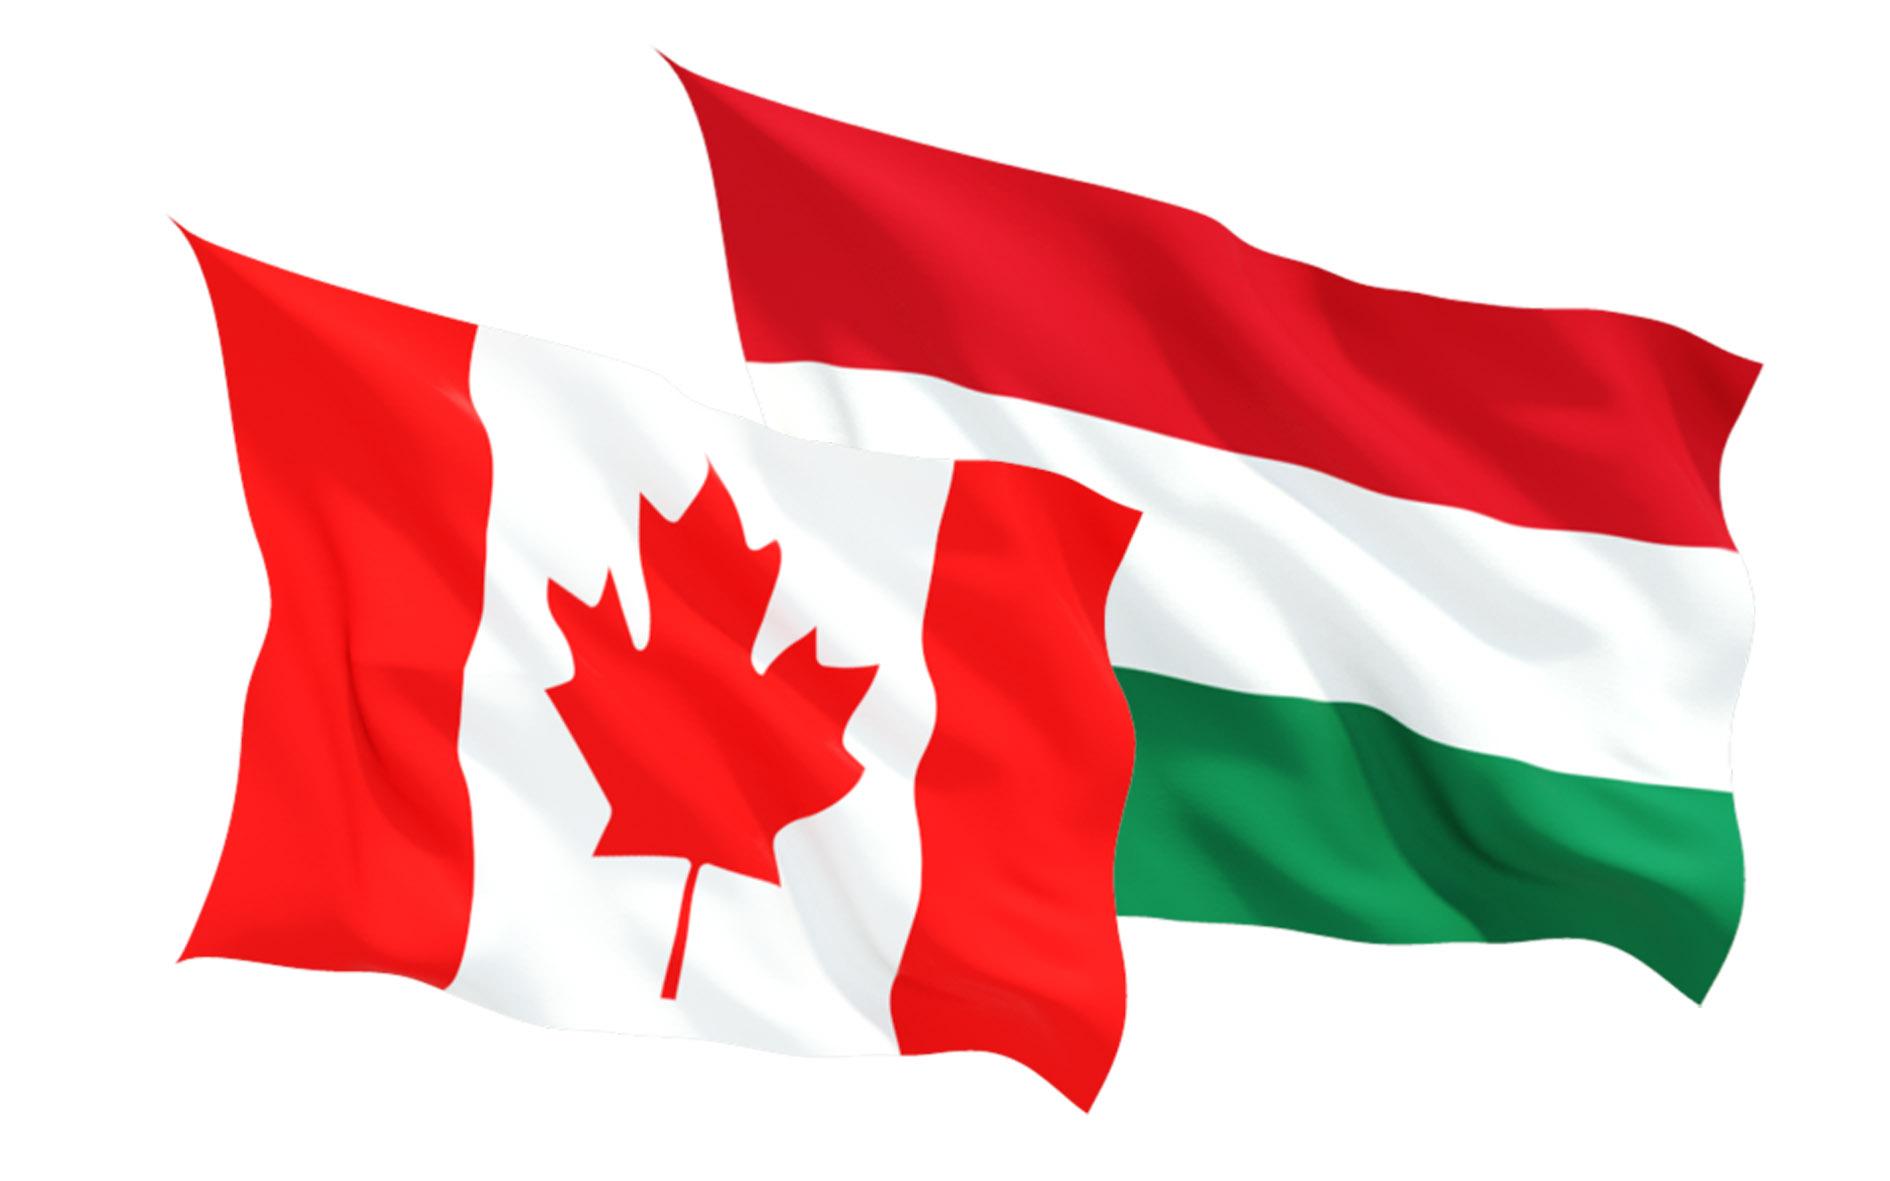 Hungary Summons Canadian Ambassador Over Remarks On Higher Education Law